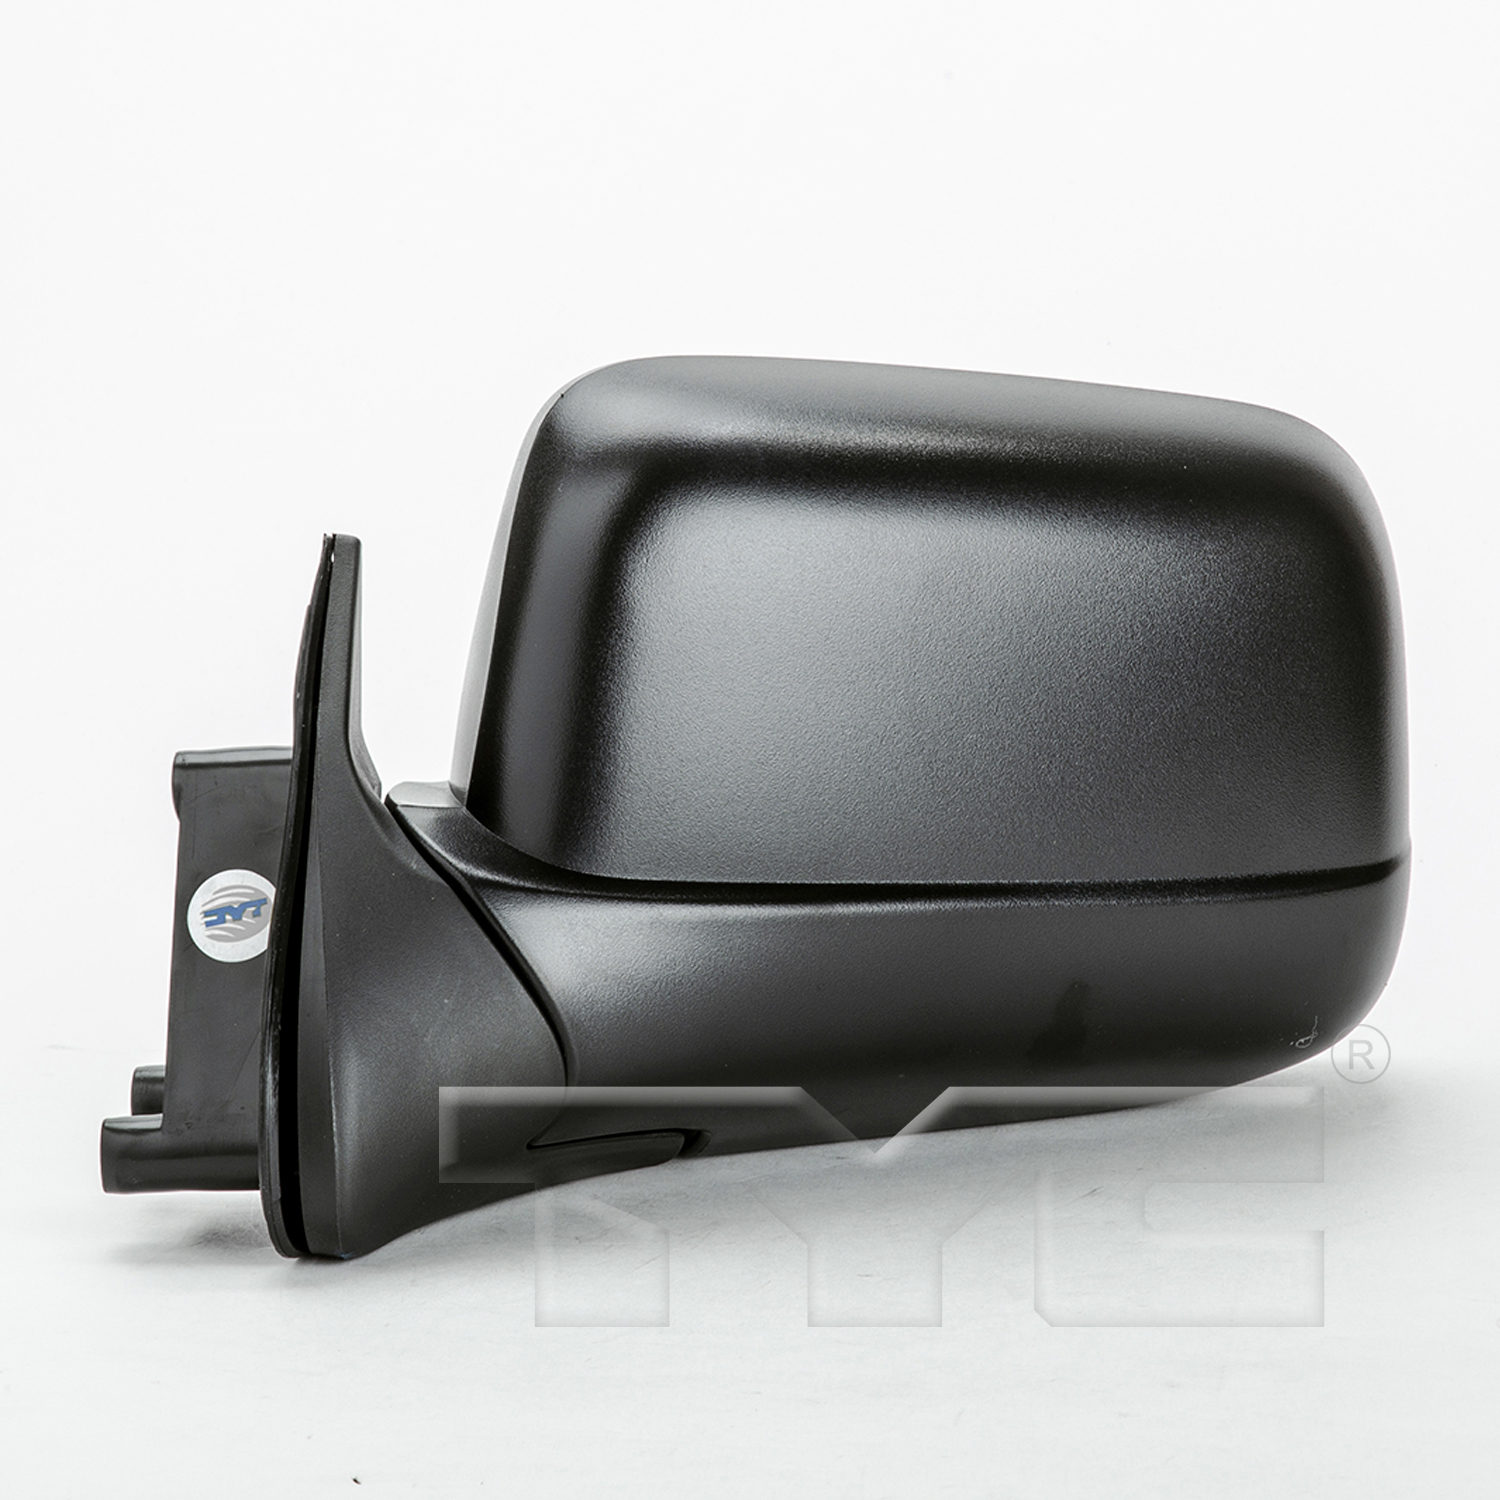 Aftermarket MIRRORS for NISSAN - FRONTIER, FRONTIER,98-99,LT Mirror outside rear view